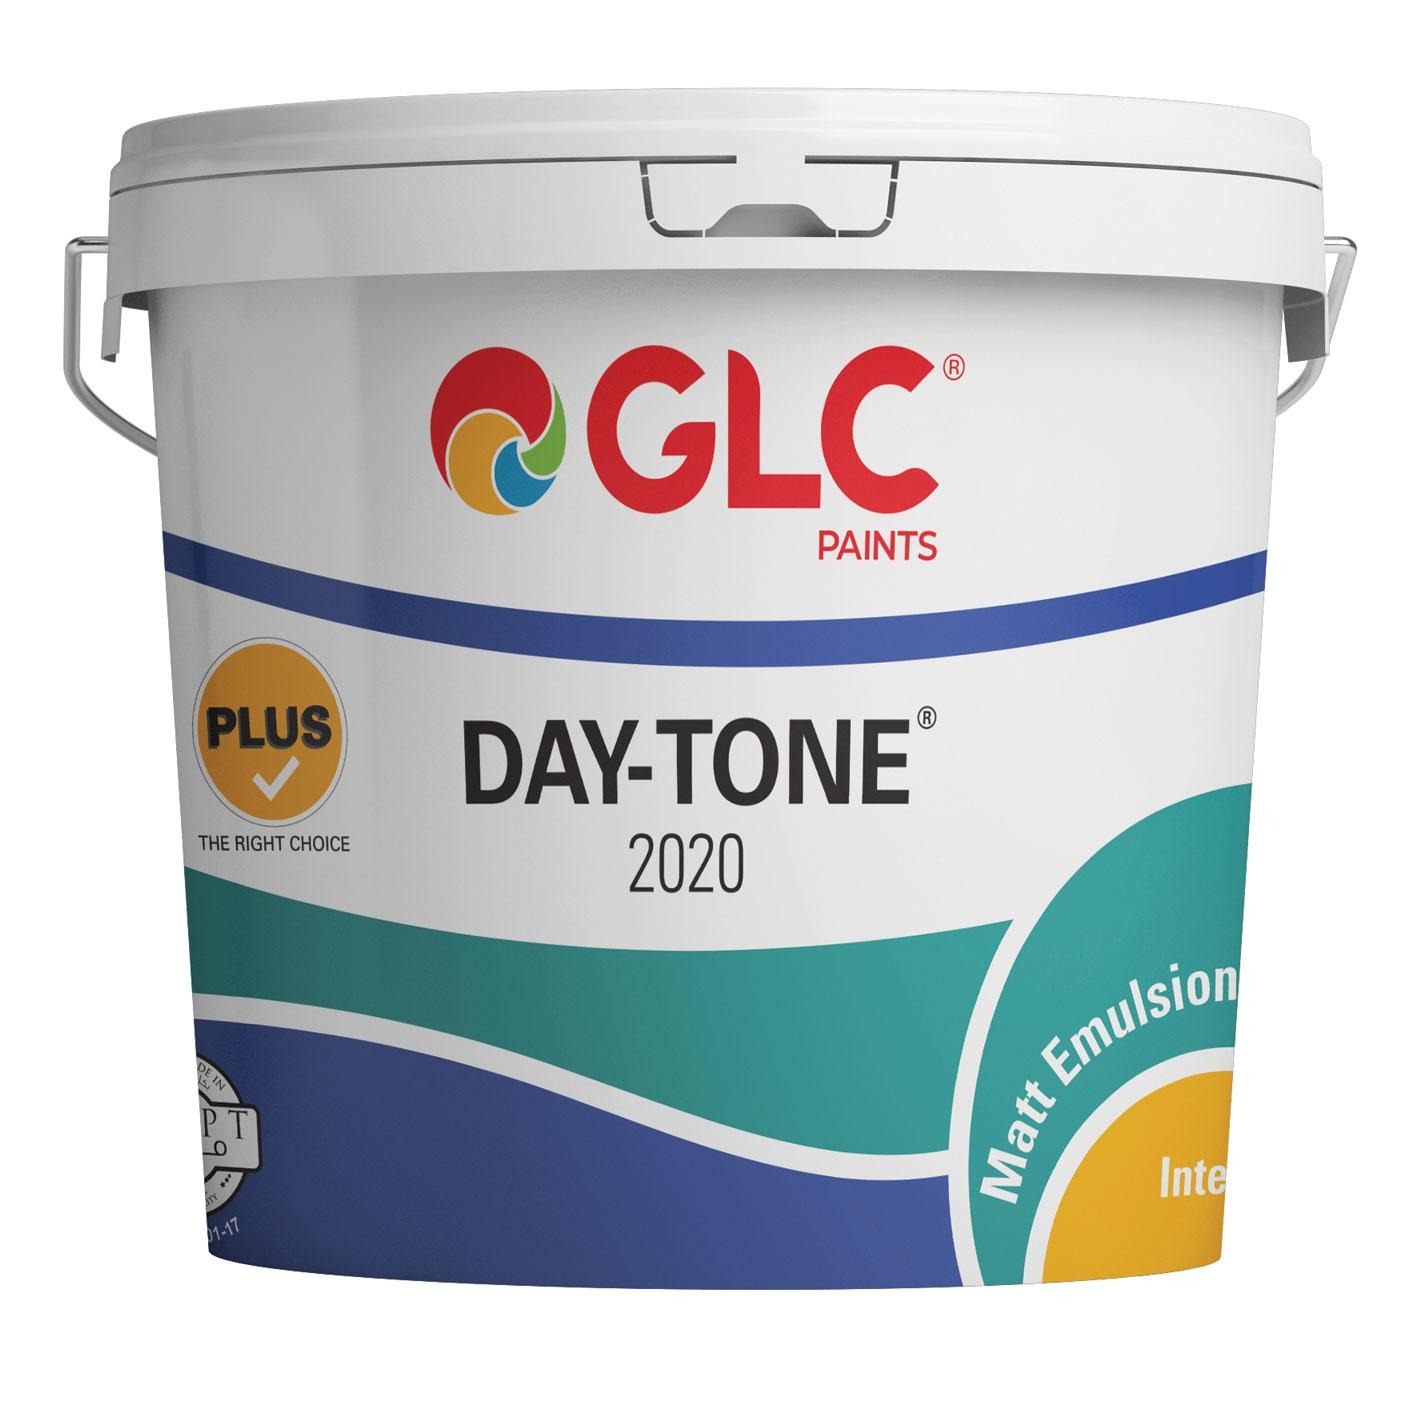 Day-Tone 2020 Painting - 14 Kg